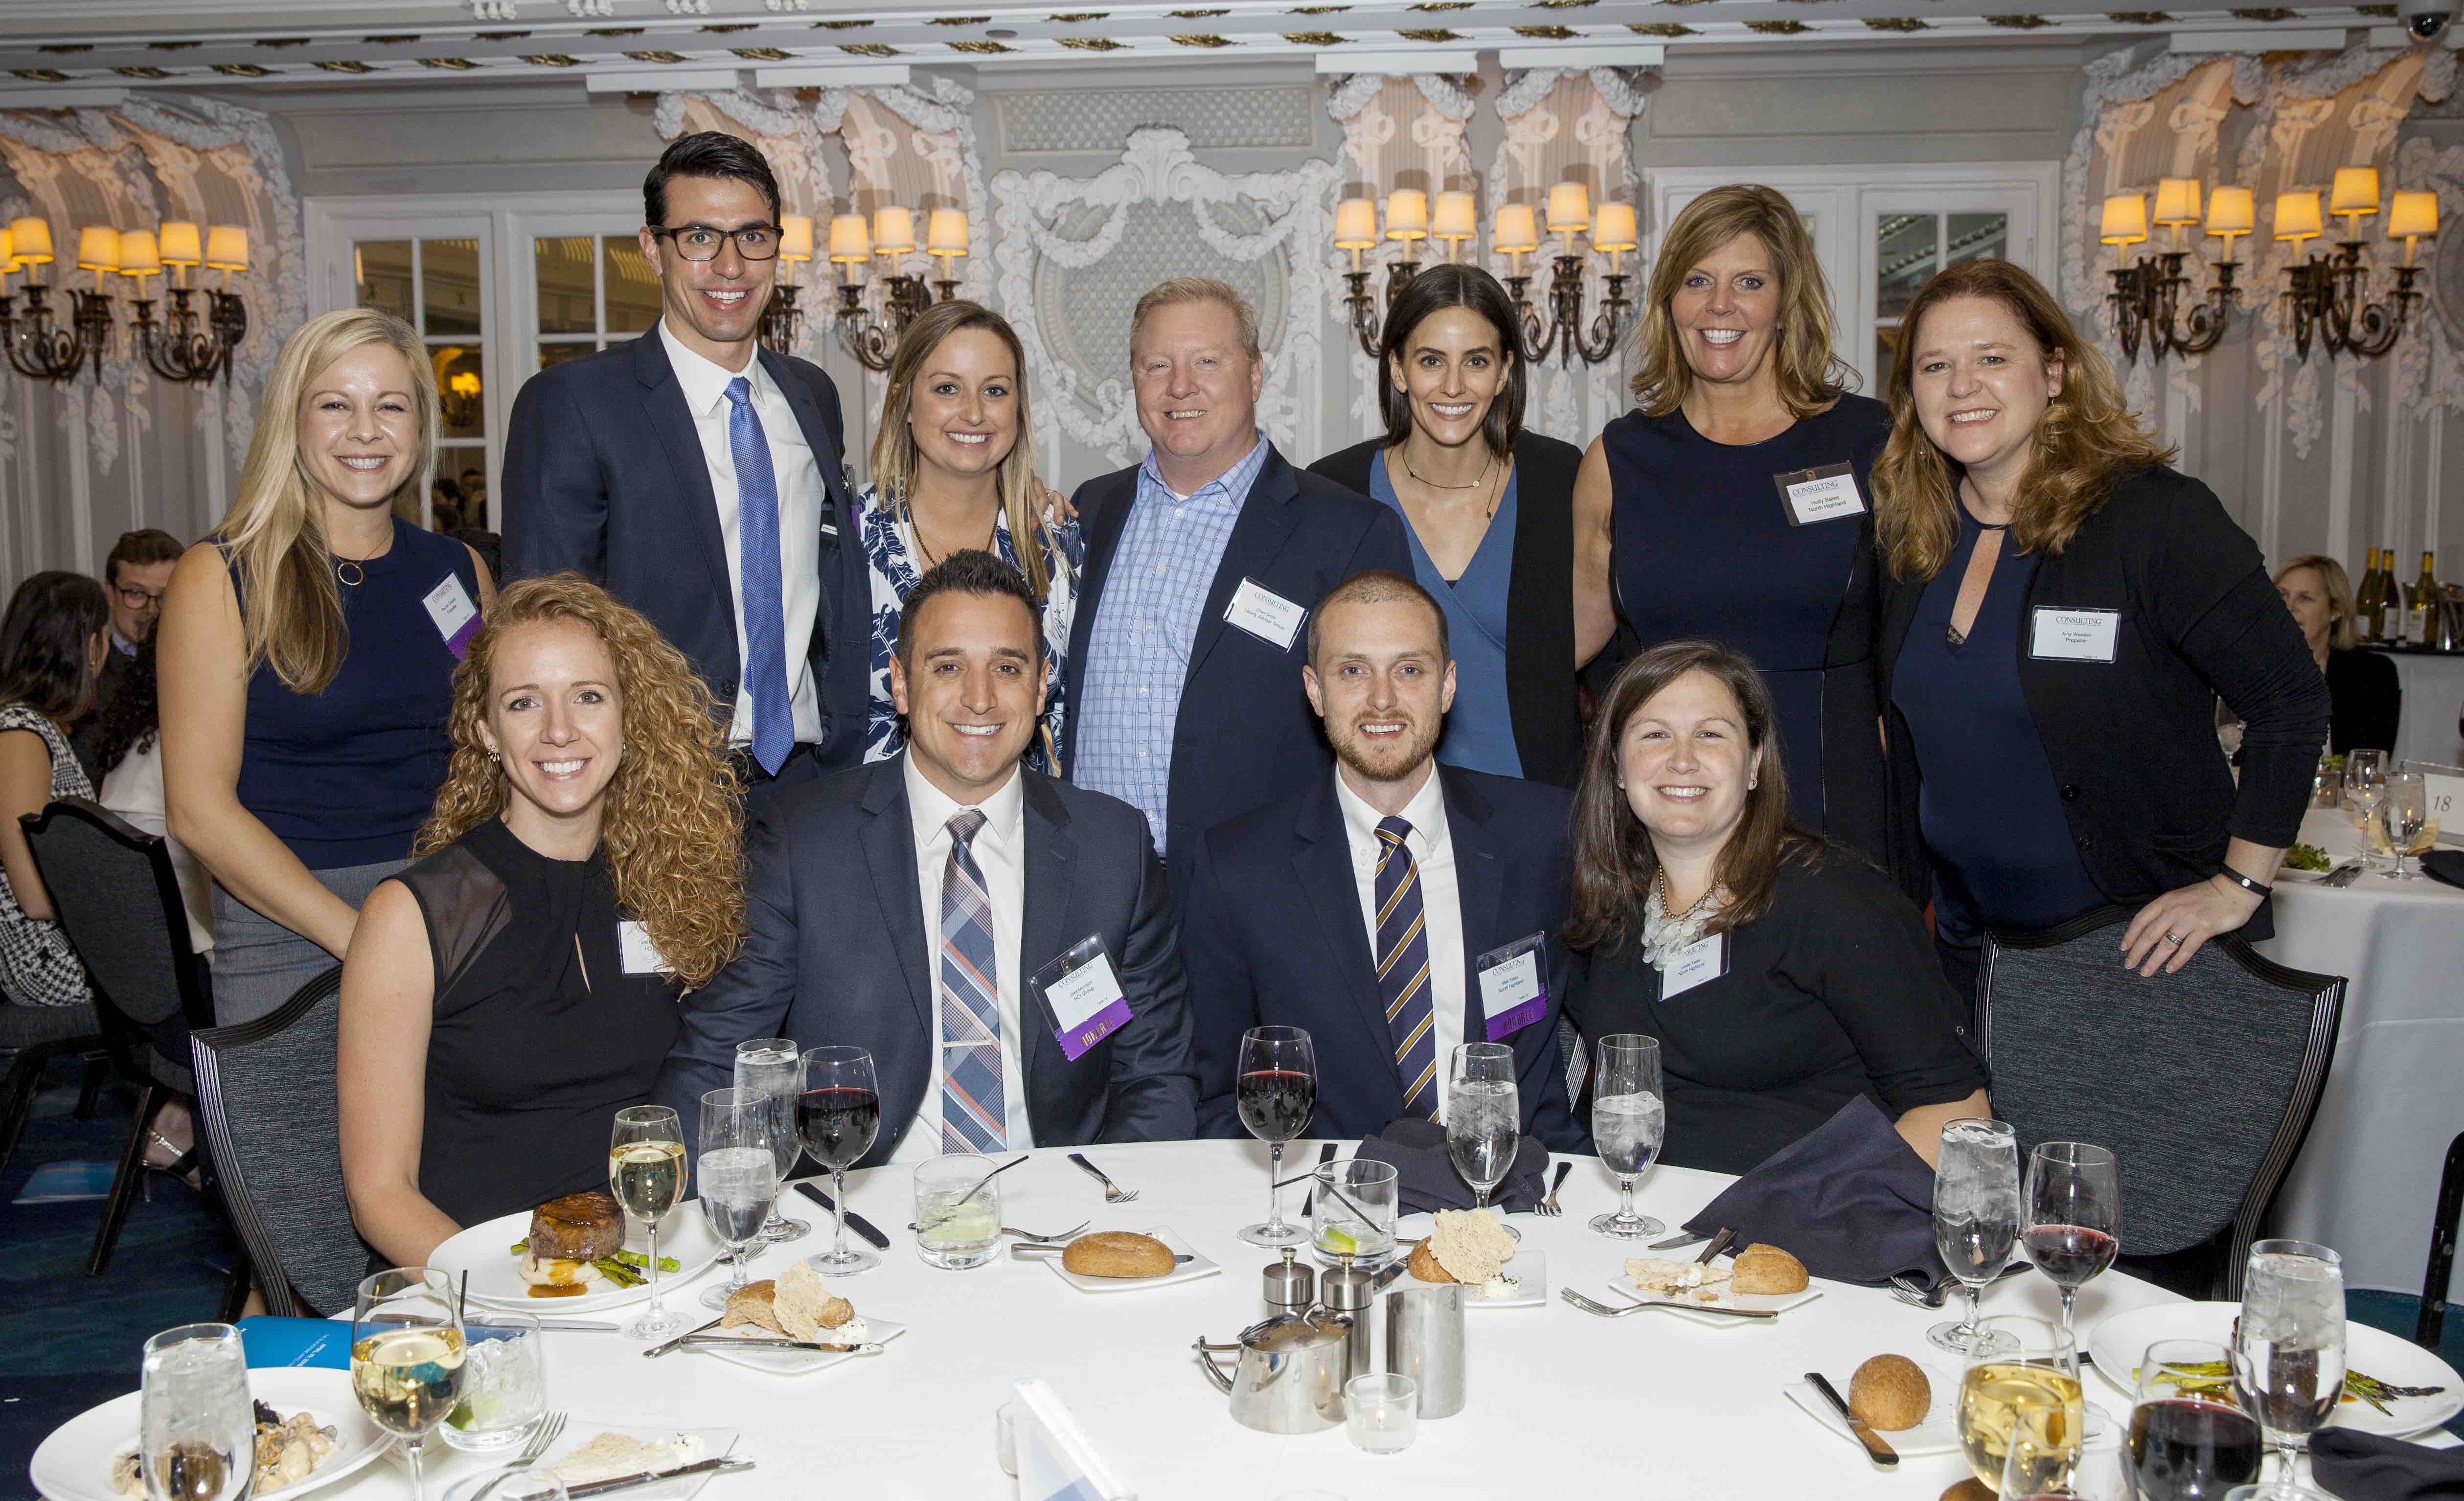 Photos: The 2018 Rising Stars of the Profession Gala